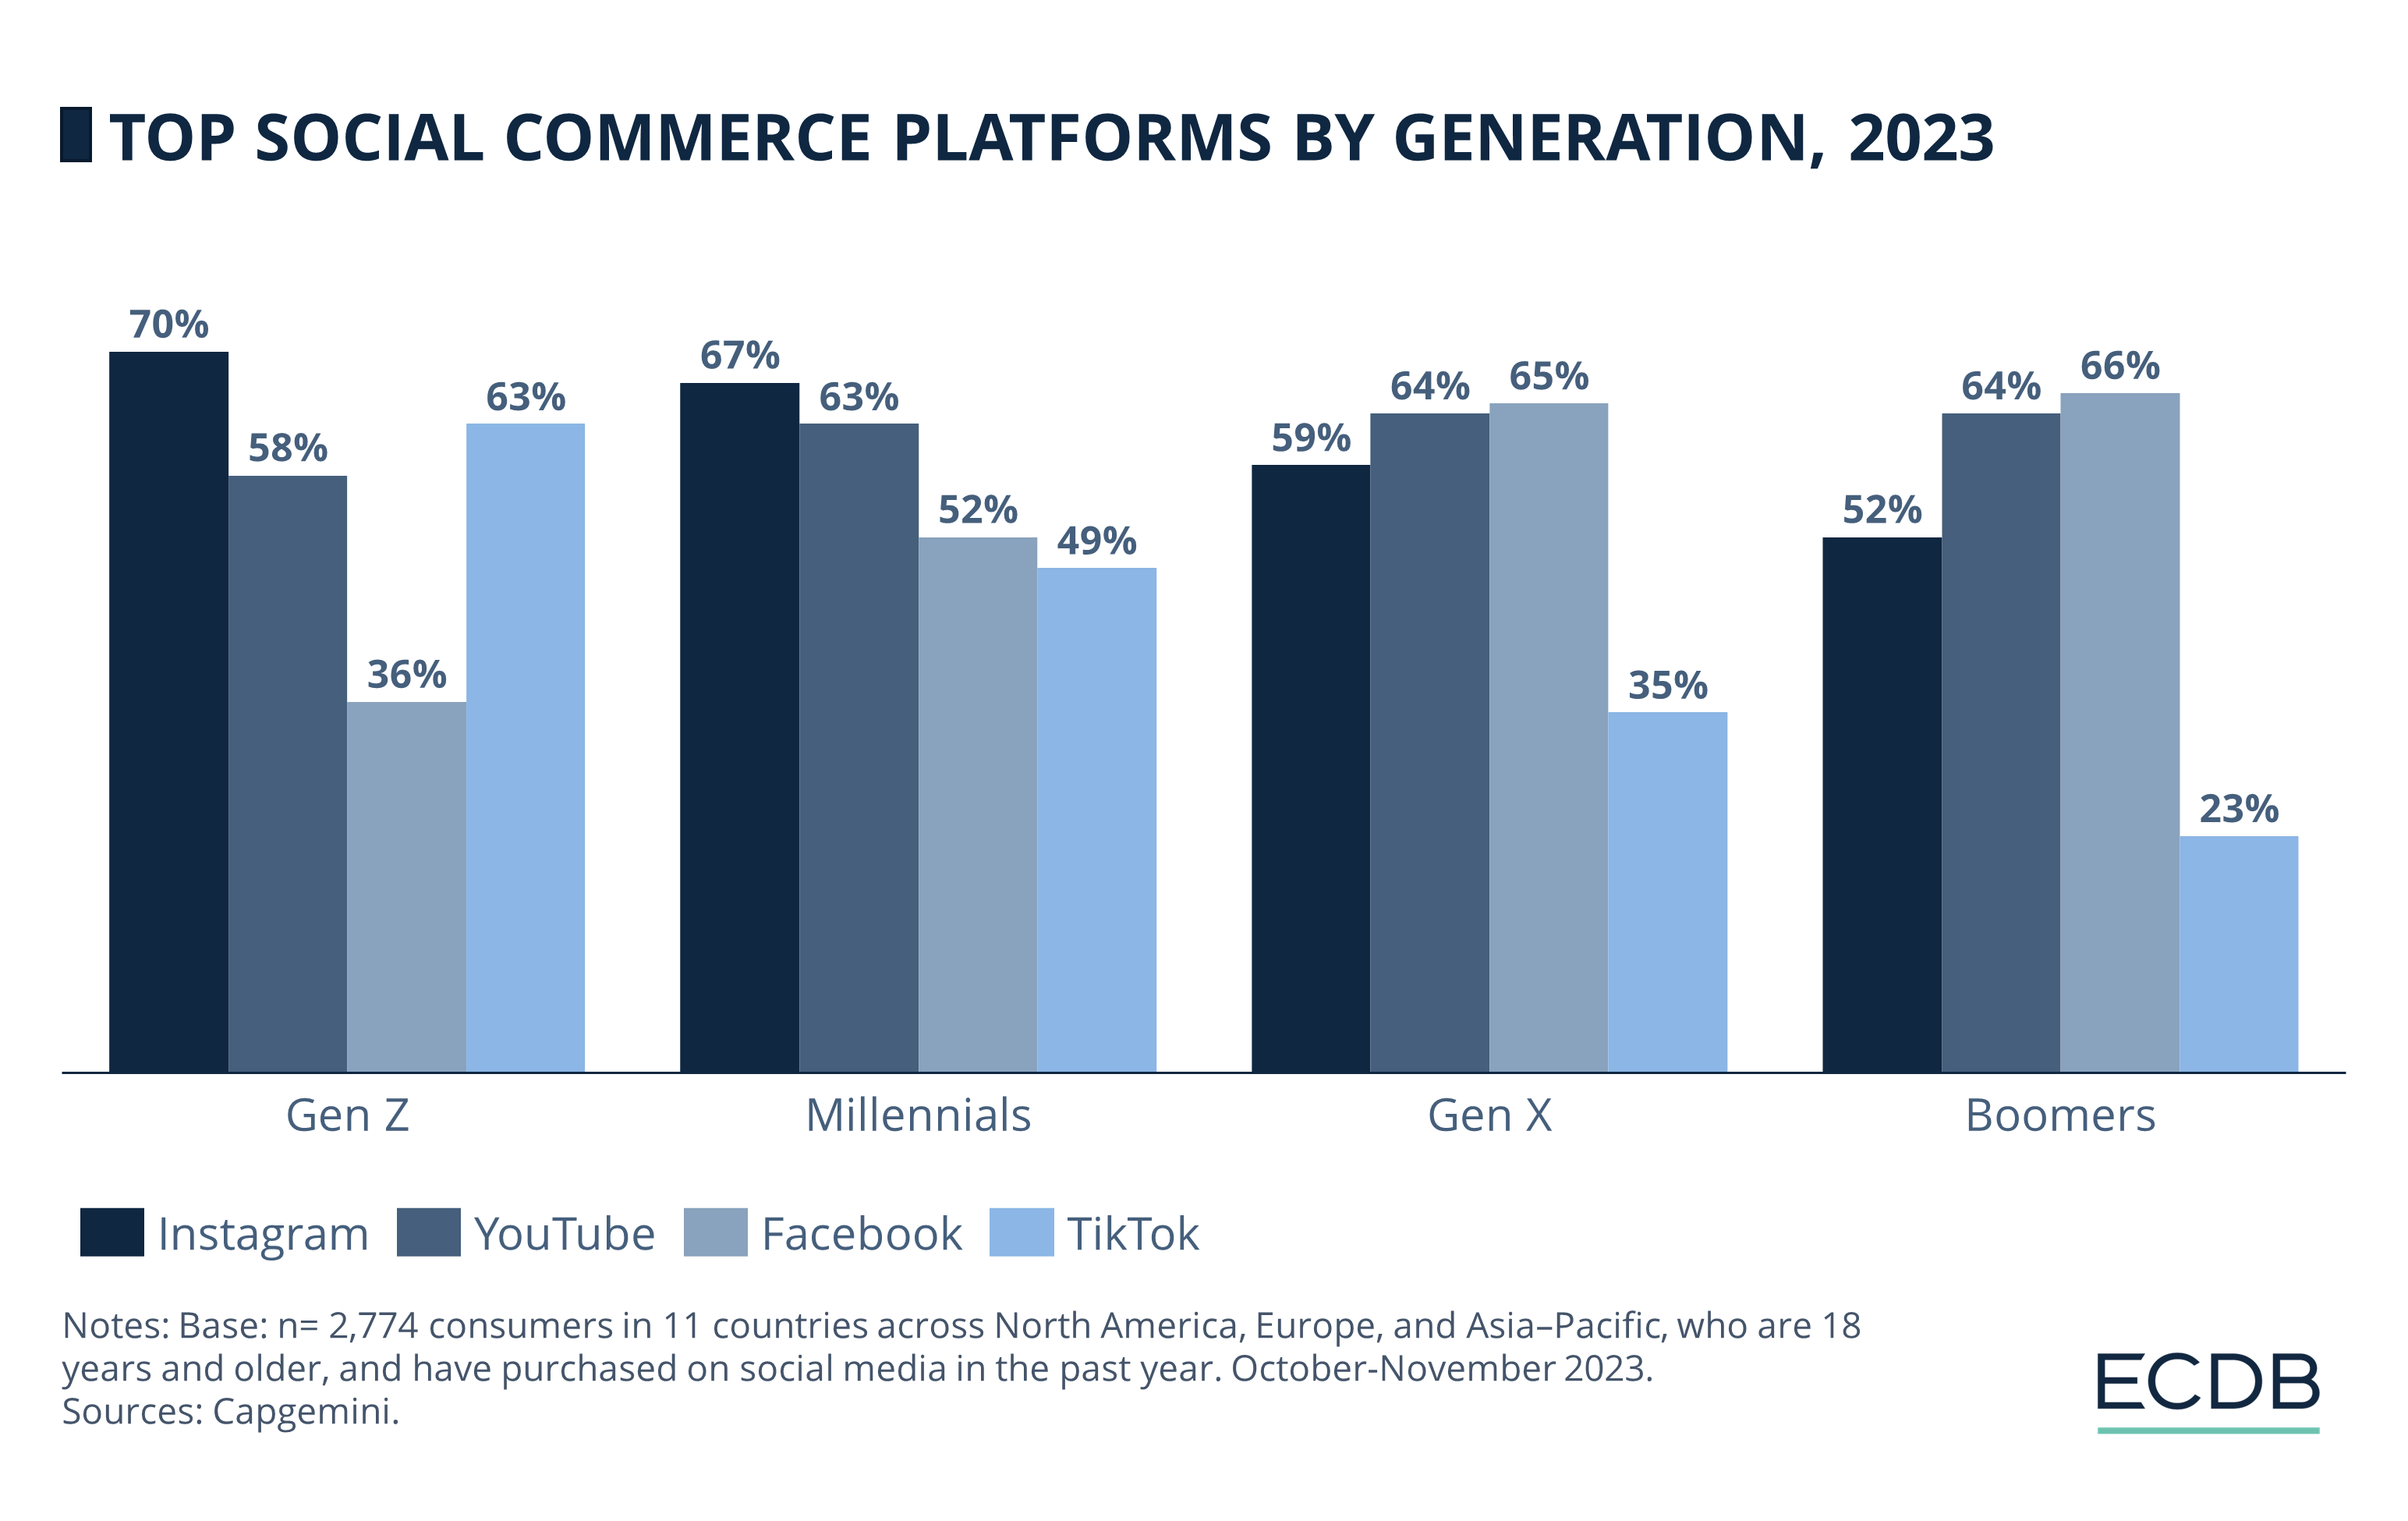 Top Social Commerce Platforms by Generation, 2023